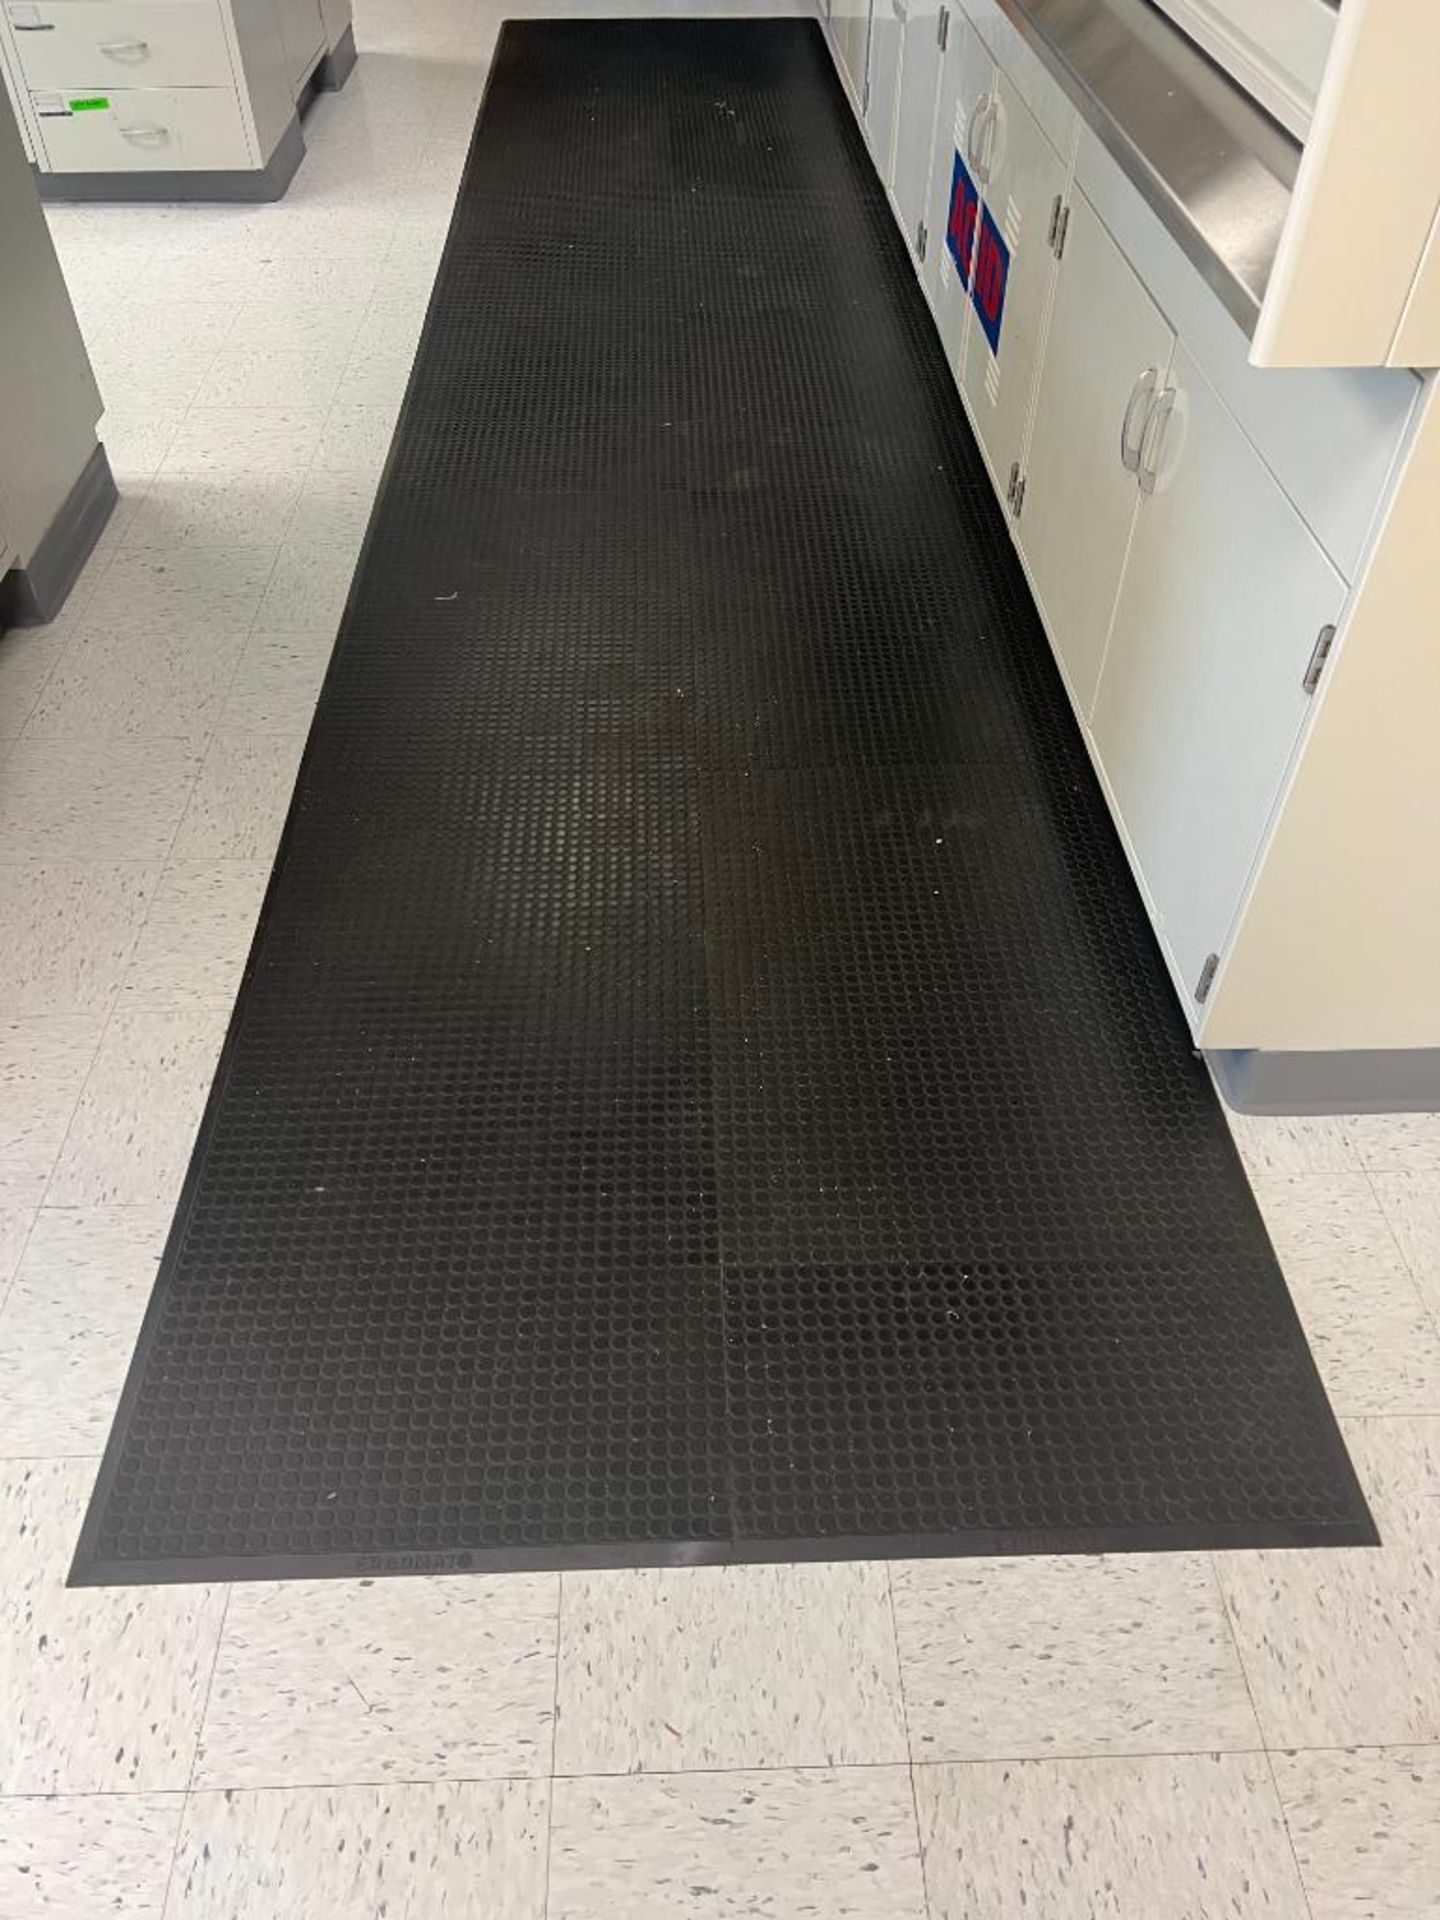 Rubber Floor Mats, Dimensions = 16' x 44" and (3) 20' x 44" - Rigging Fee: $50 - Image 2 of 4